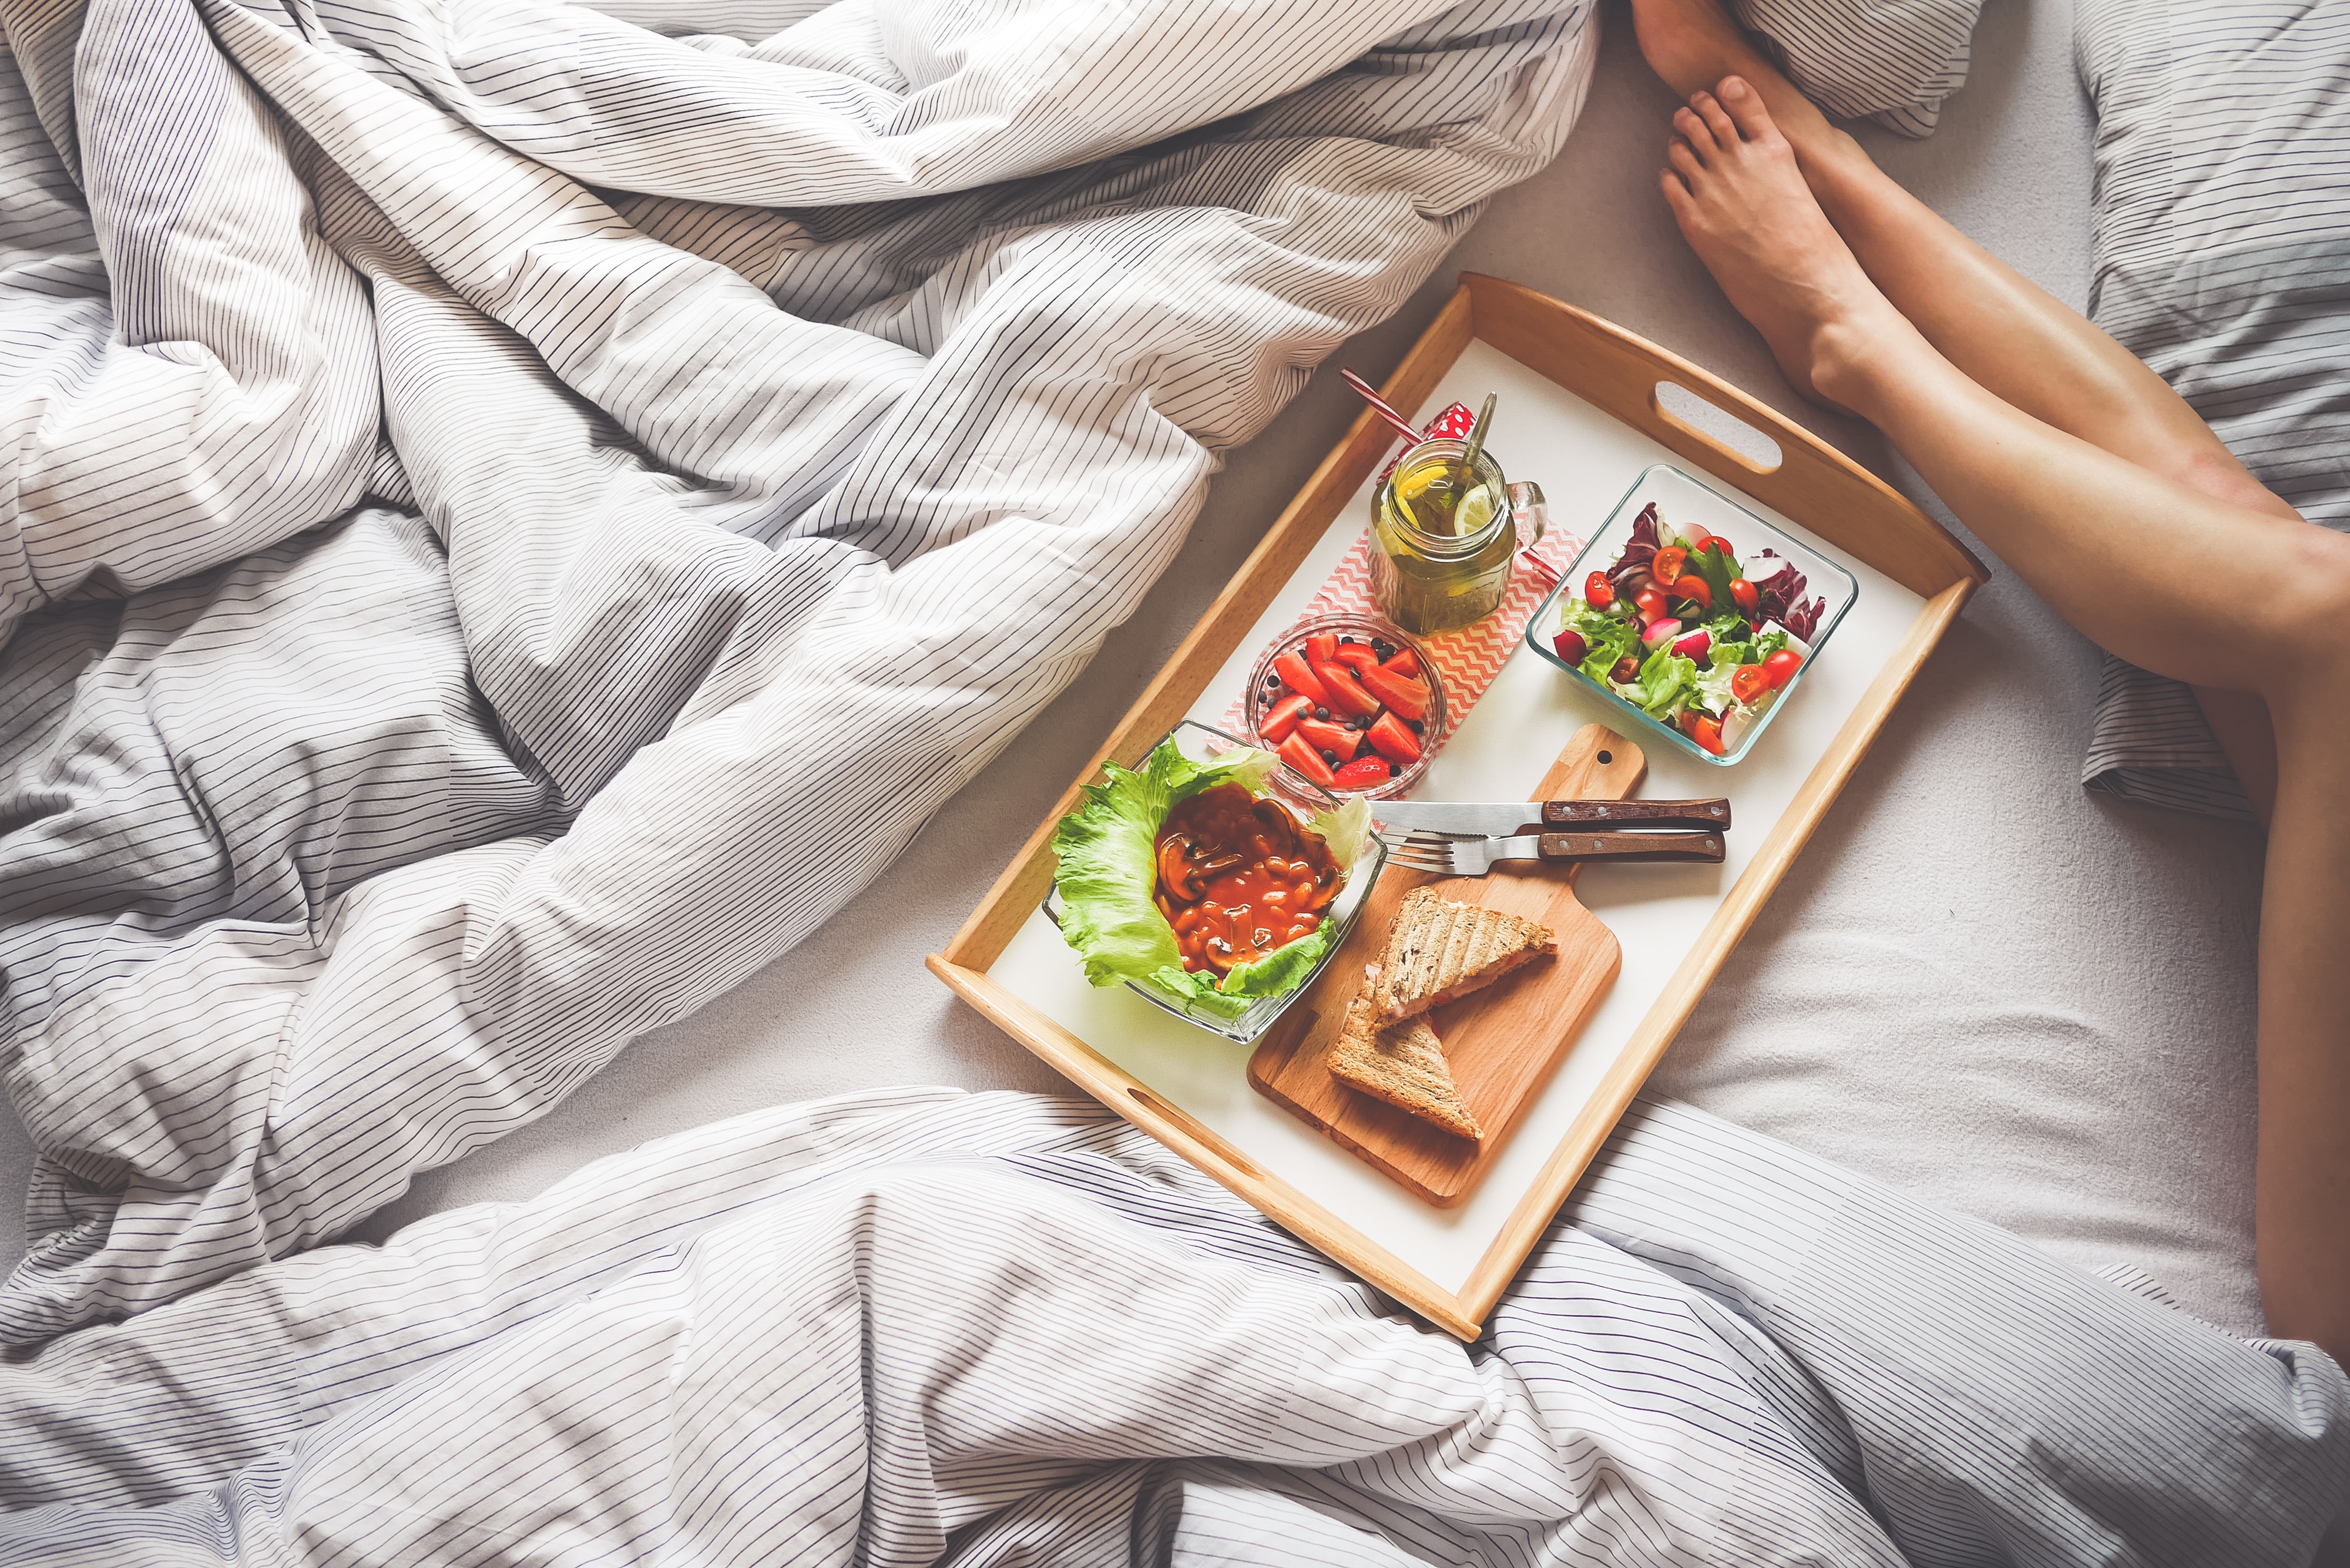 person laying in bed near brown serving tray filled with fruits and sandwich